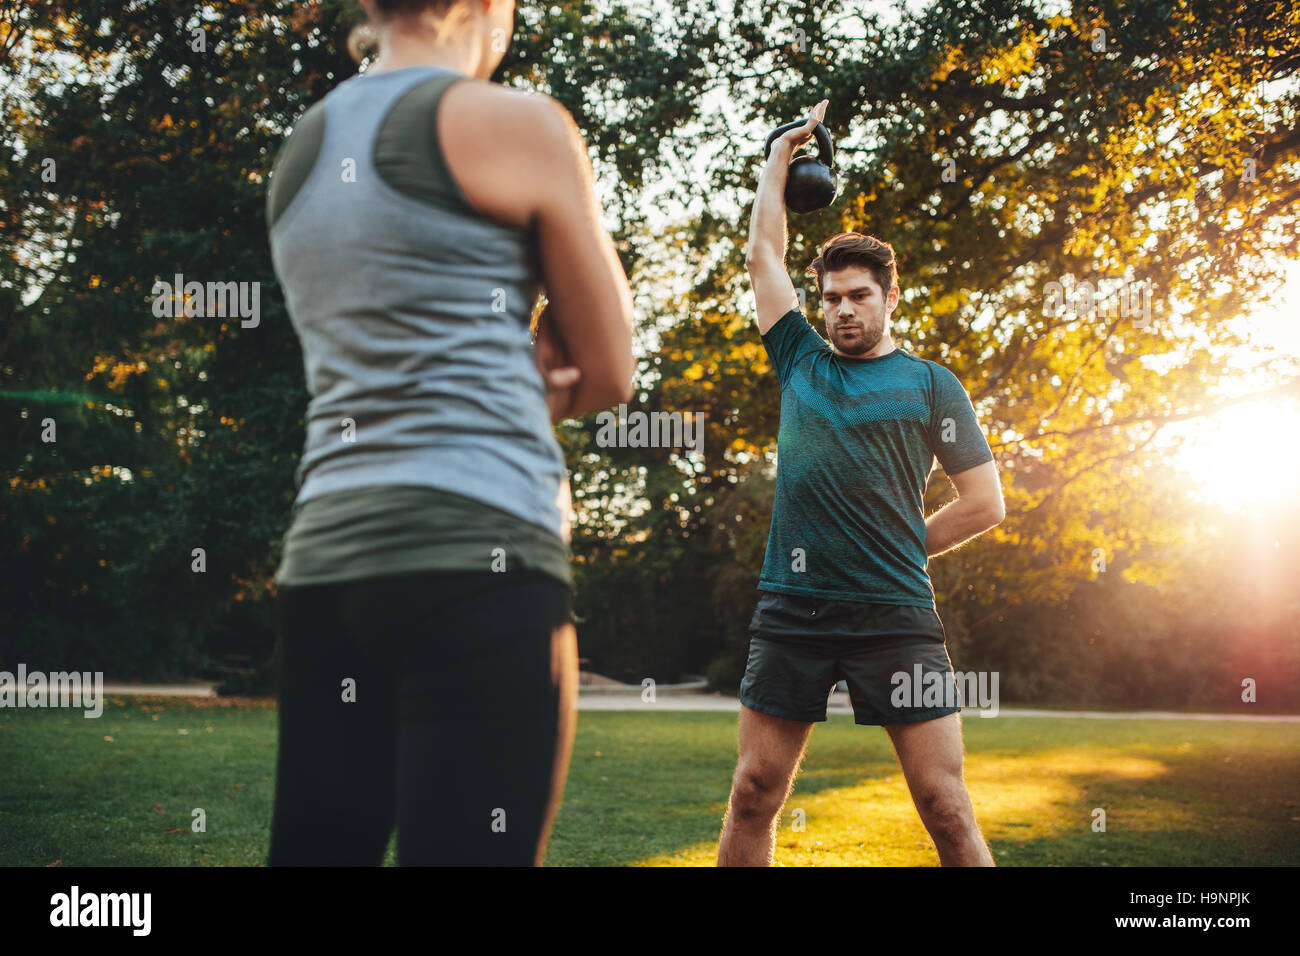 Young man doing weight training with personal female trainer in the park. Caucasian male exercising with kettlebell. Stock Photo